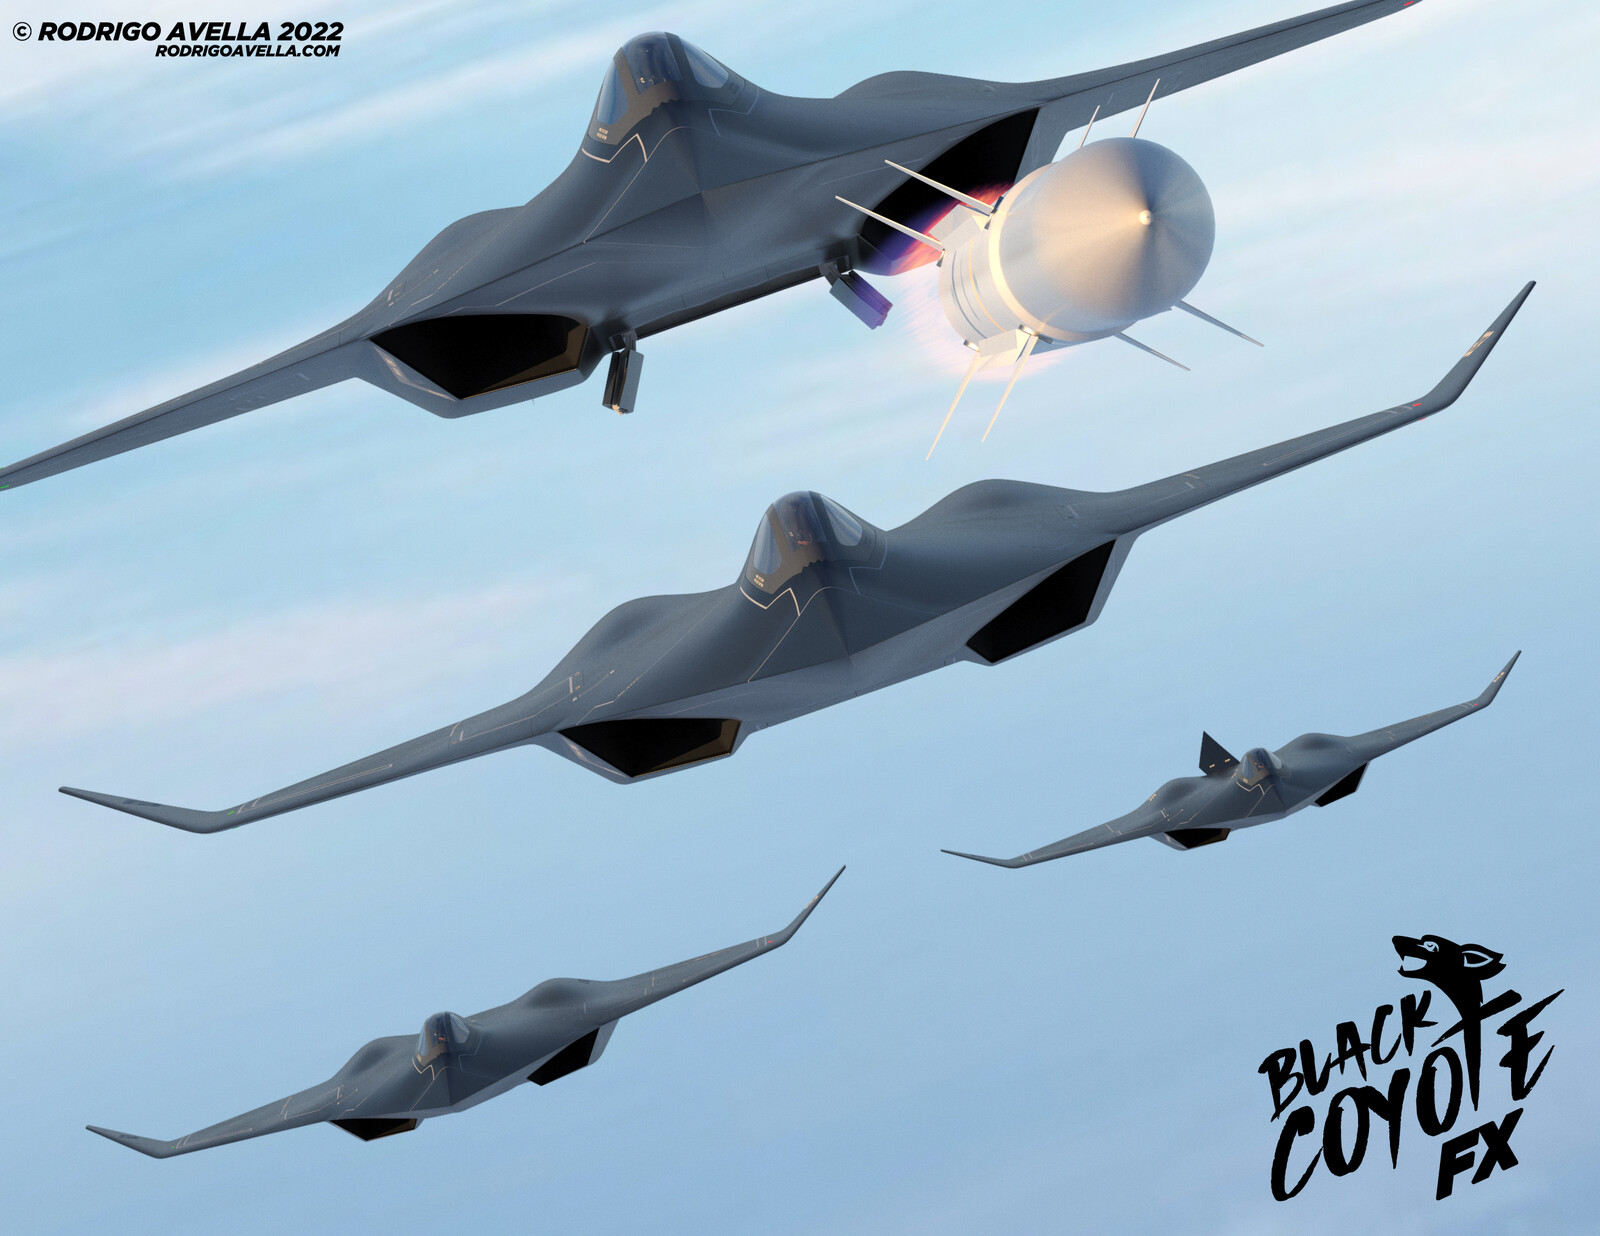 Black Coyote FX - Sixth generation fighter concept